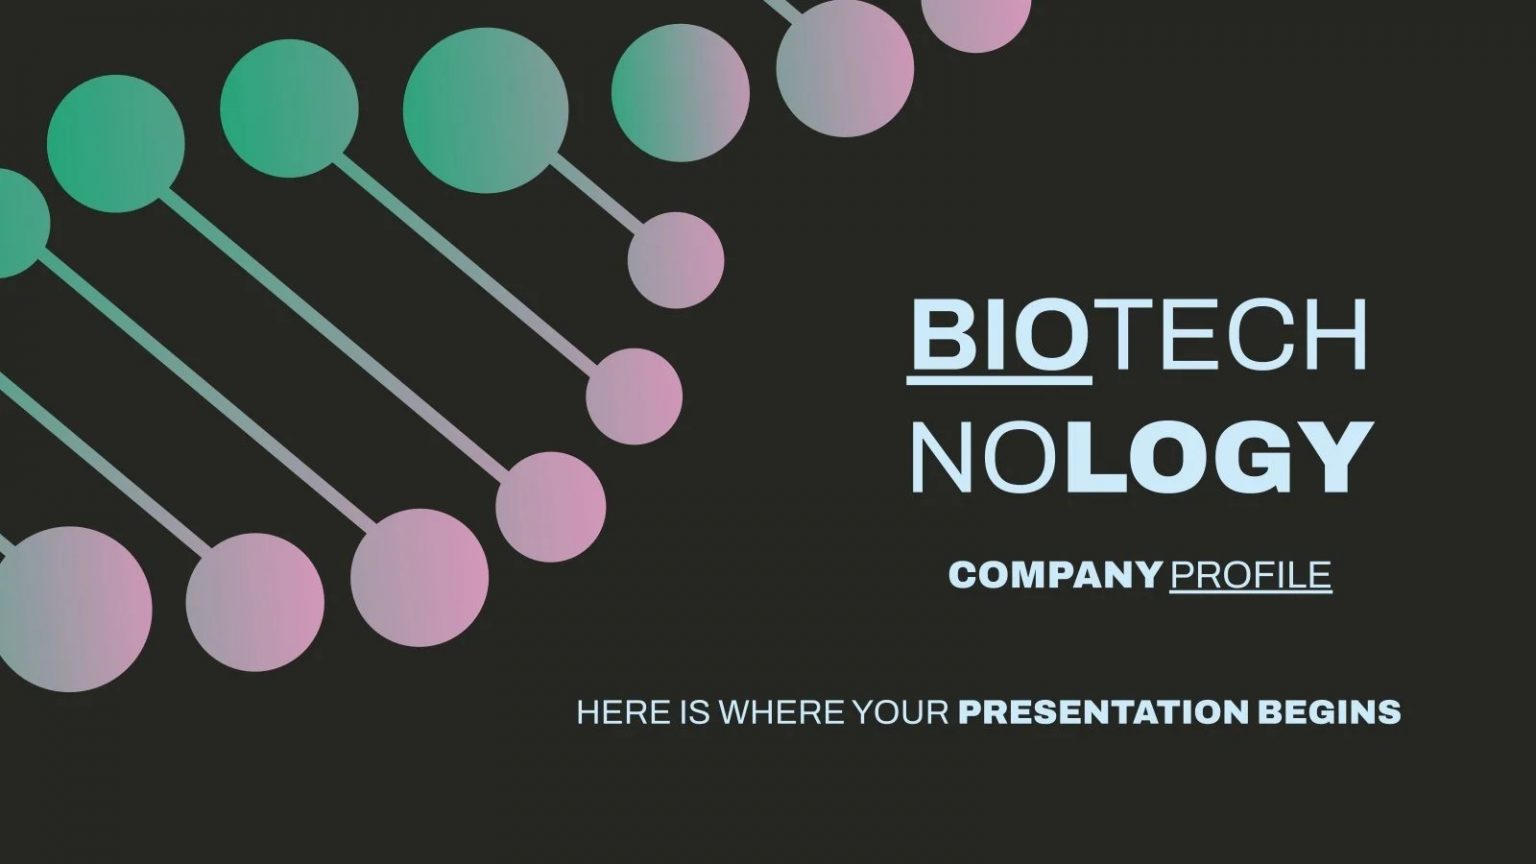 powerpoint presentation topics for biotechnology